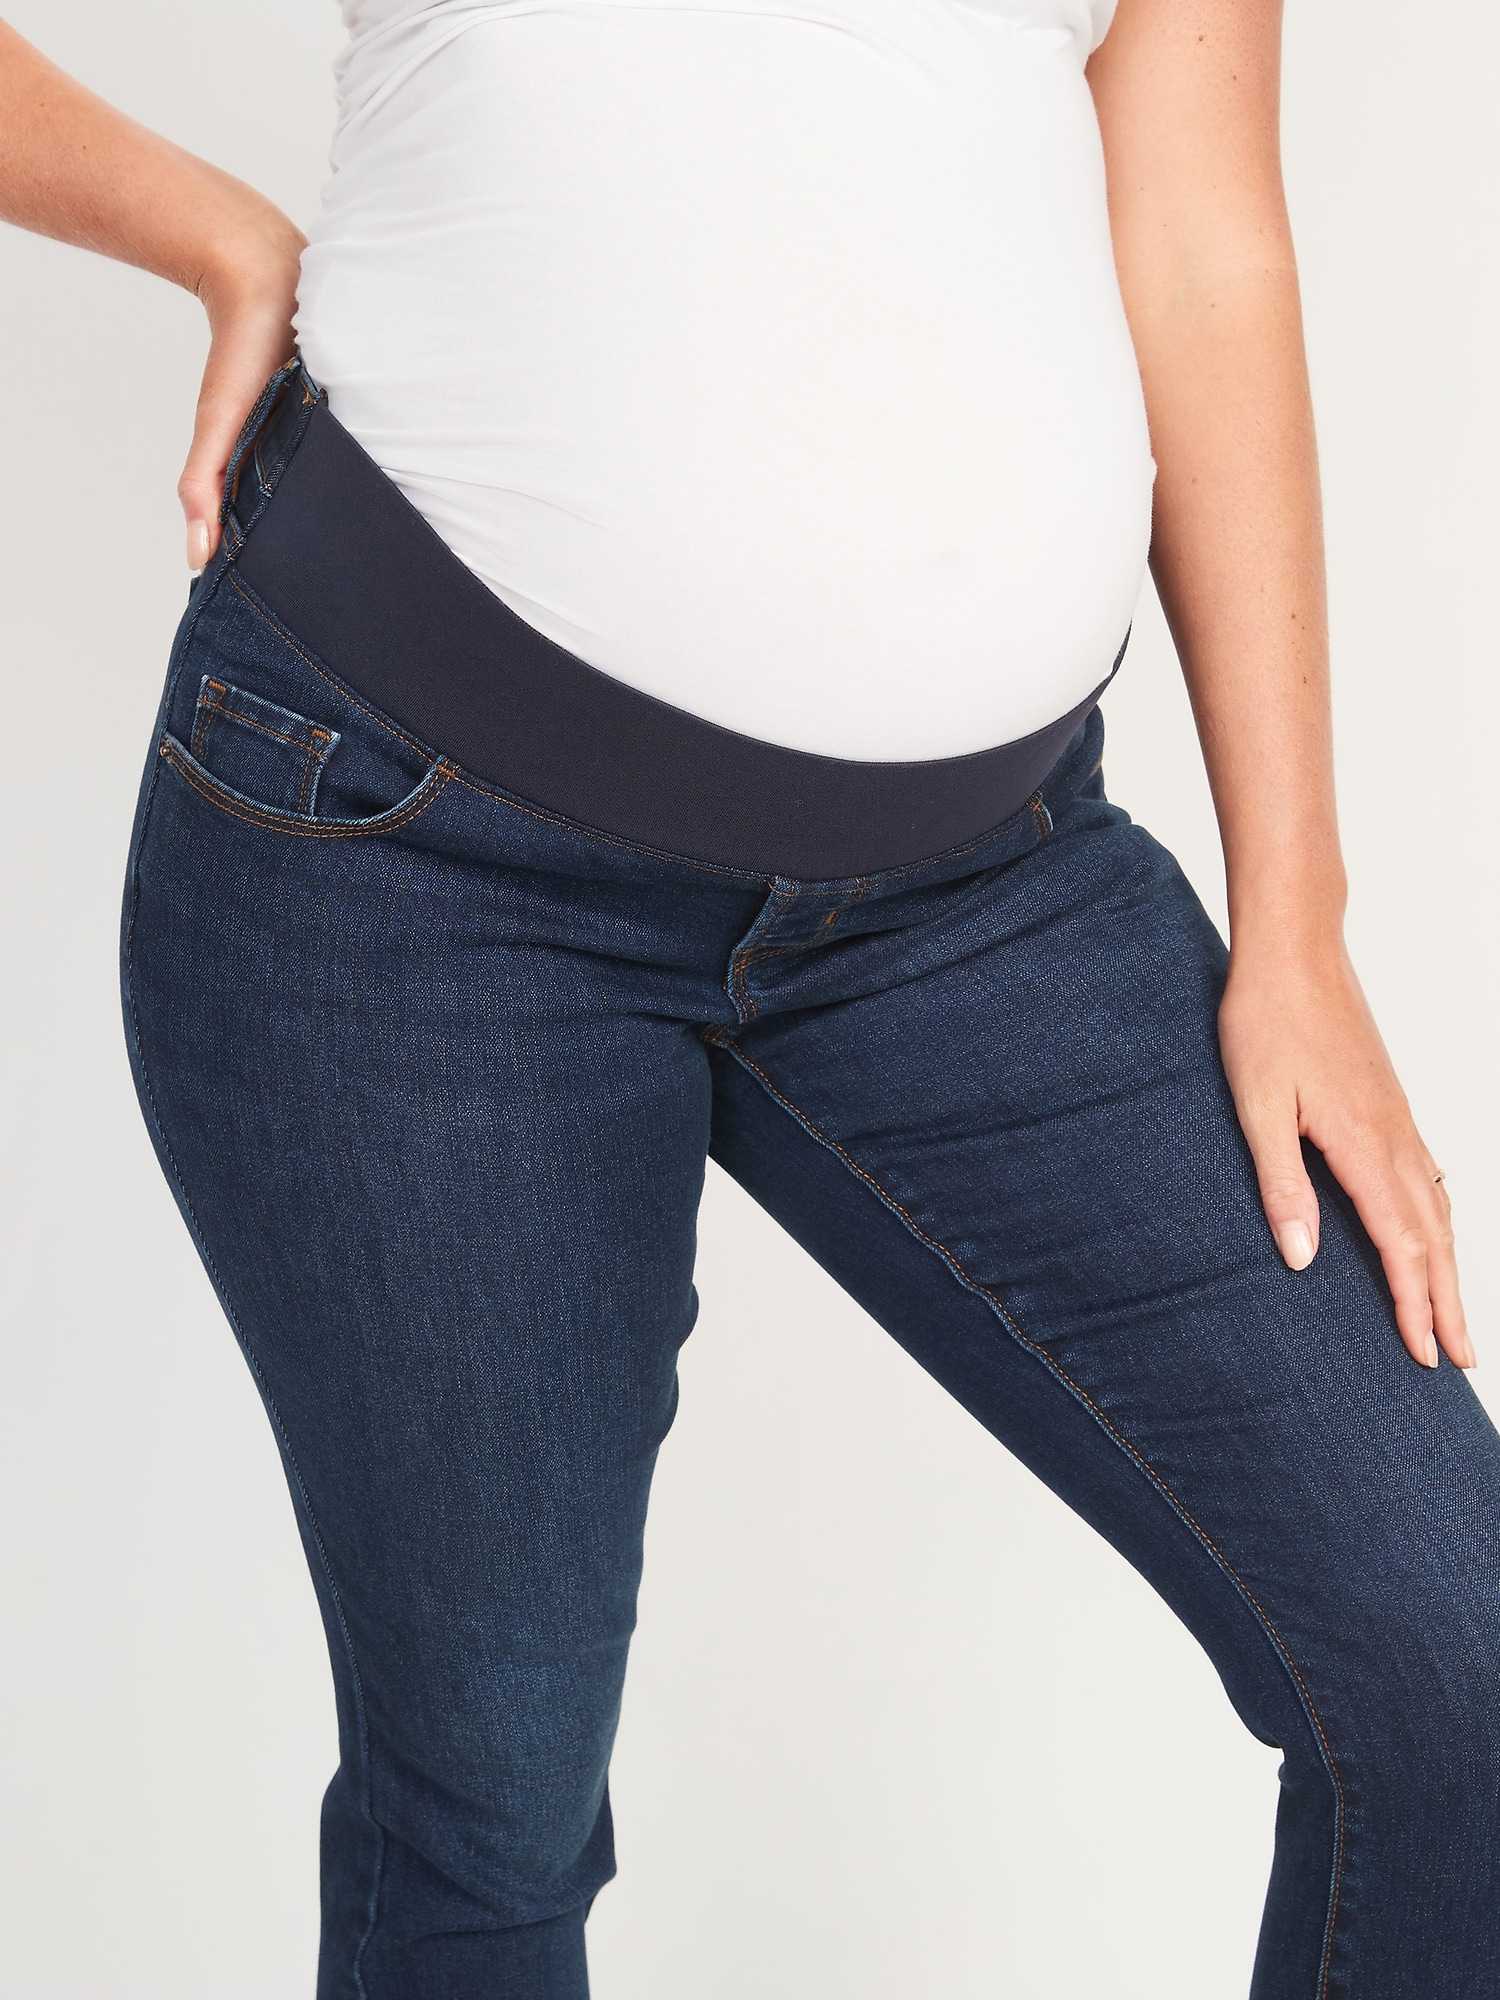 kokain festspil Oberst Maternity Front Low Panel Pop Icon Skinny Jeans | Old Navy